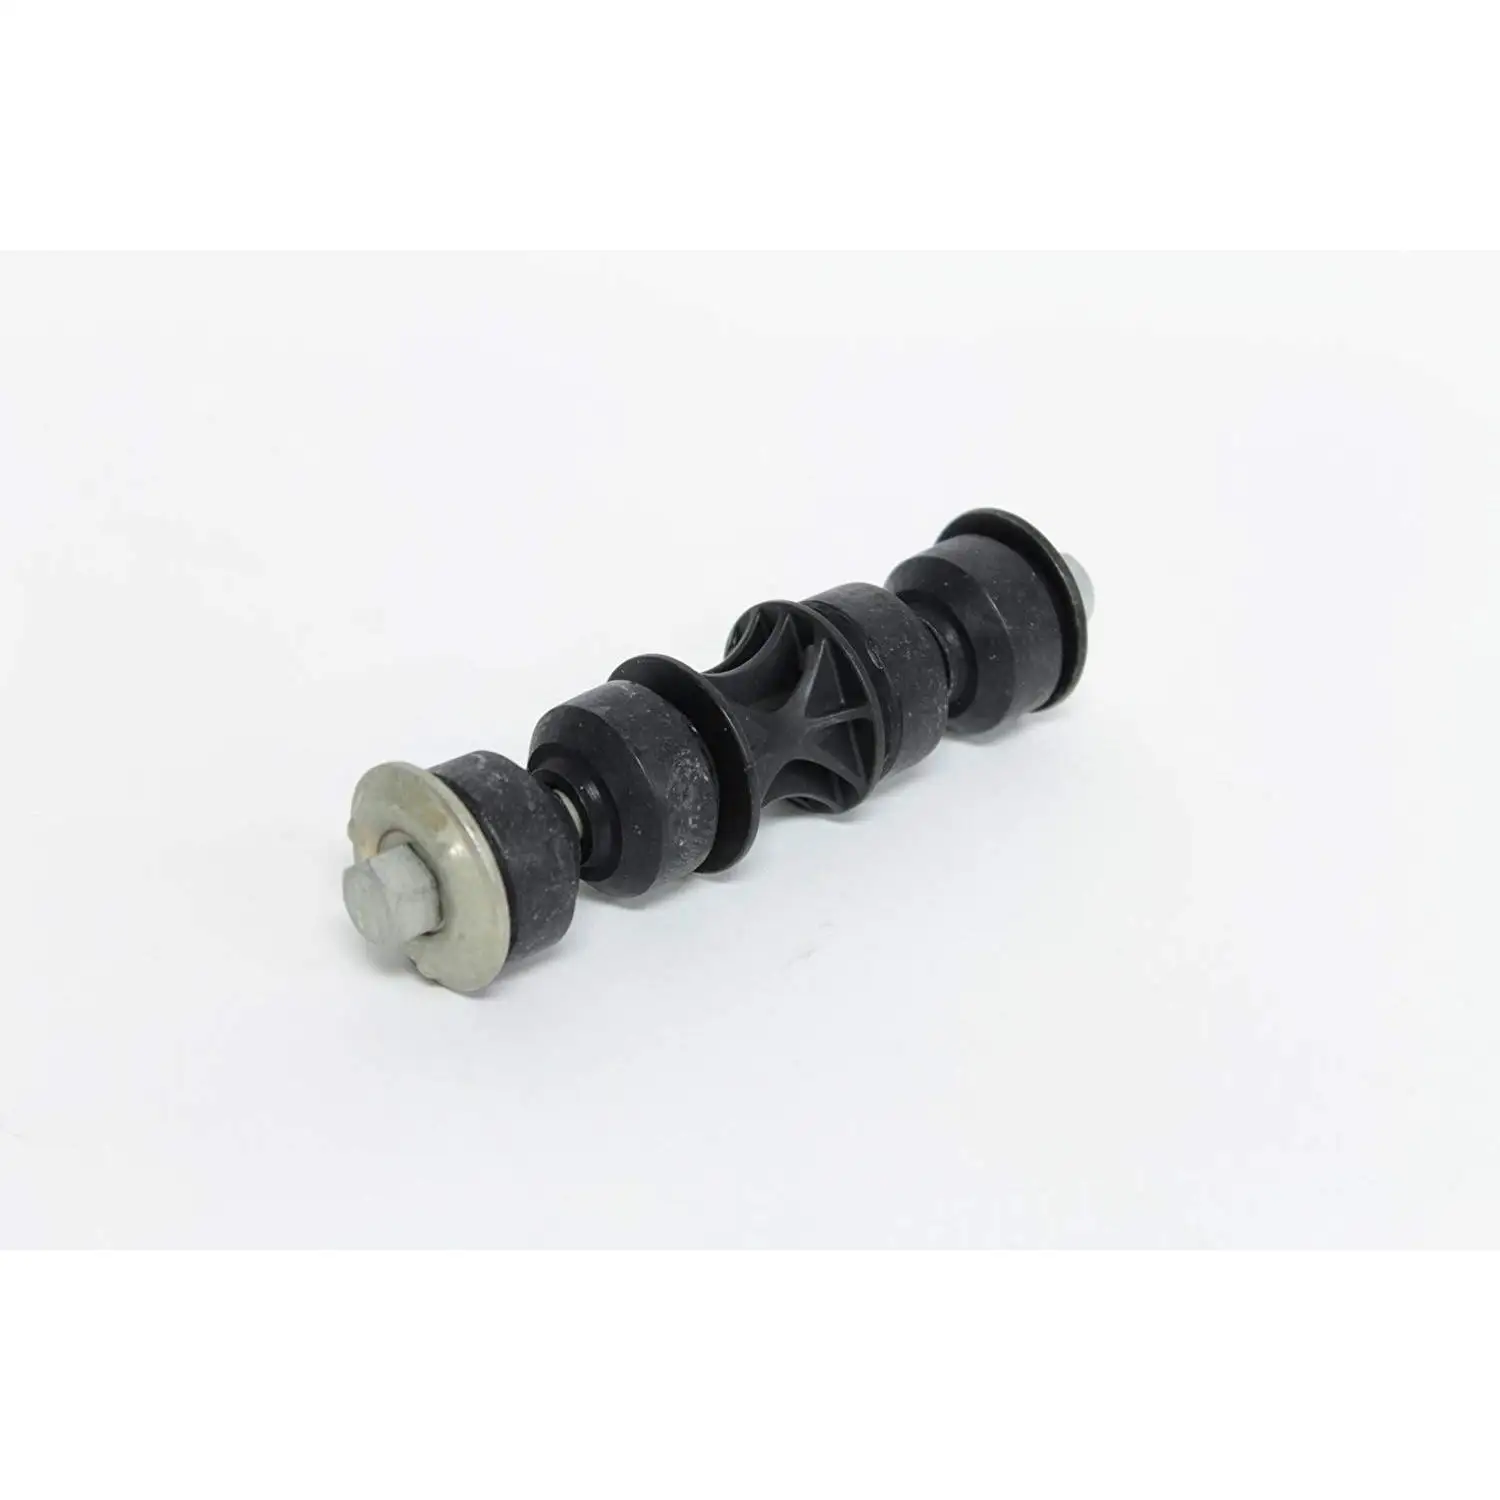 5151803aa Jeep Stabilizer Link / Compass (Mk 49) Front both Sides Comfortable Easy System Driving Safety And Convenience With | Автомобили